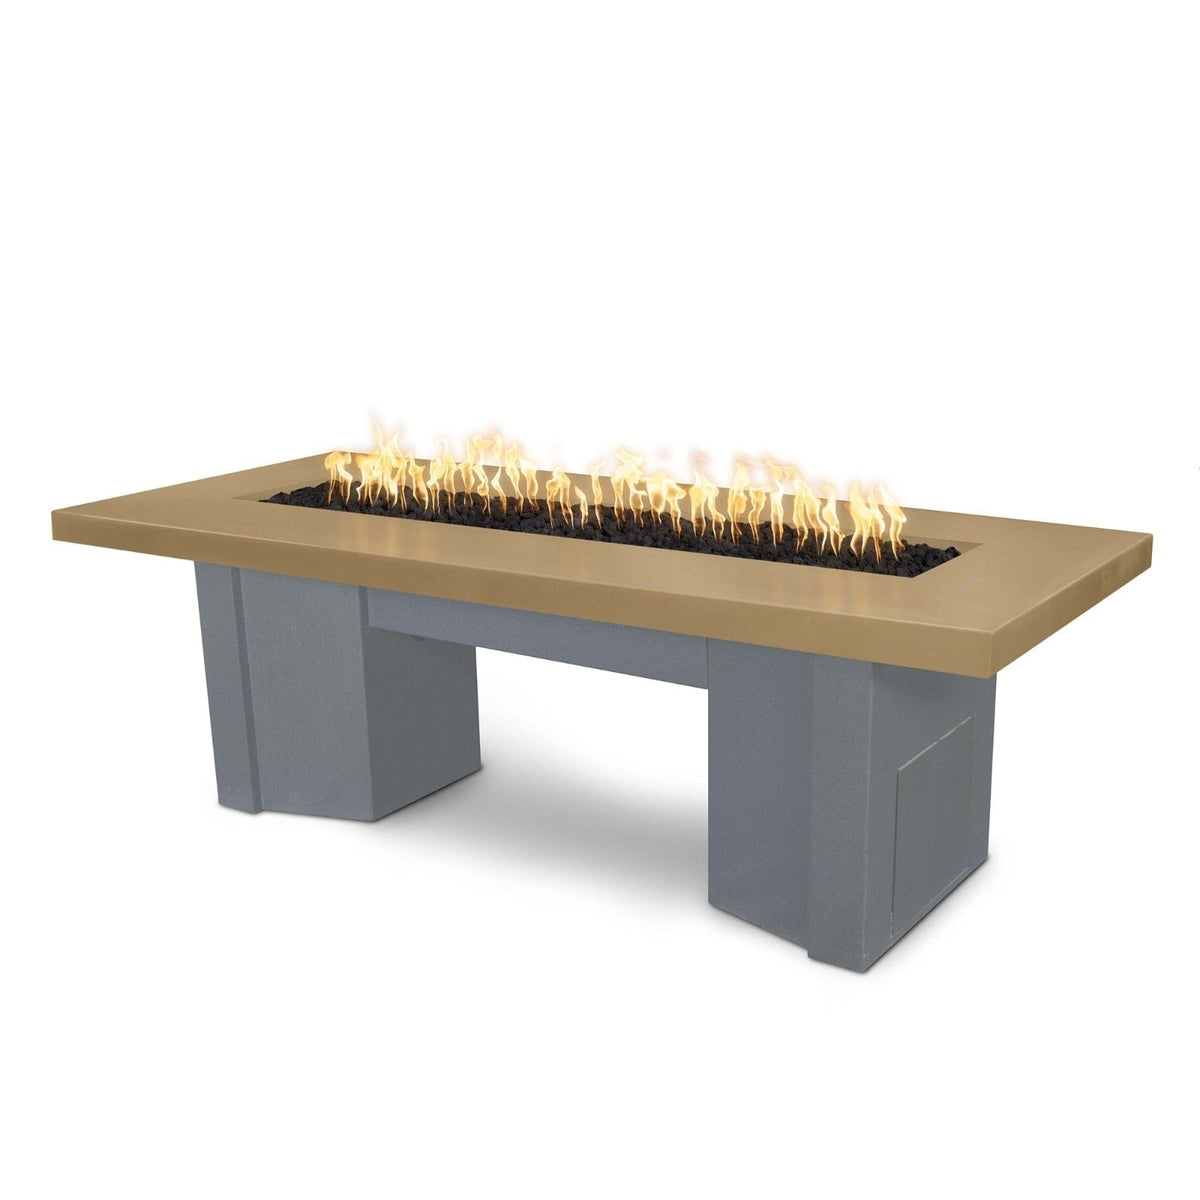 The Outdoor Plus Fire Features Brown (-BRN) / Gray Powder Coated Steel (-GRY) The Outdoor Plus 60&quot; Alameda Fire Table Smooth Concrete in Natural Gas - Flame Sense System with Push Button Spark Igniter / OPT-ALMGFRC60FSEN-NG